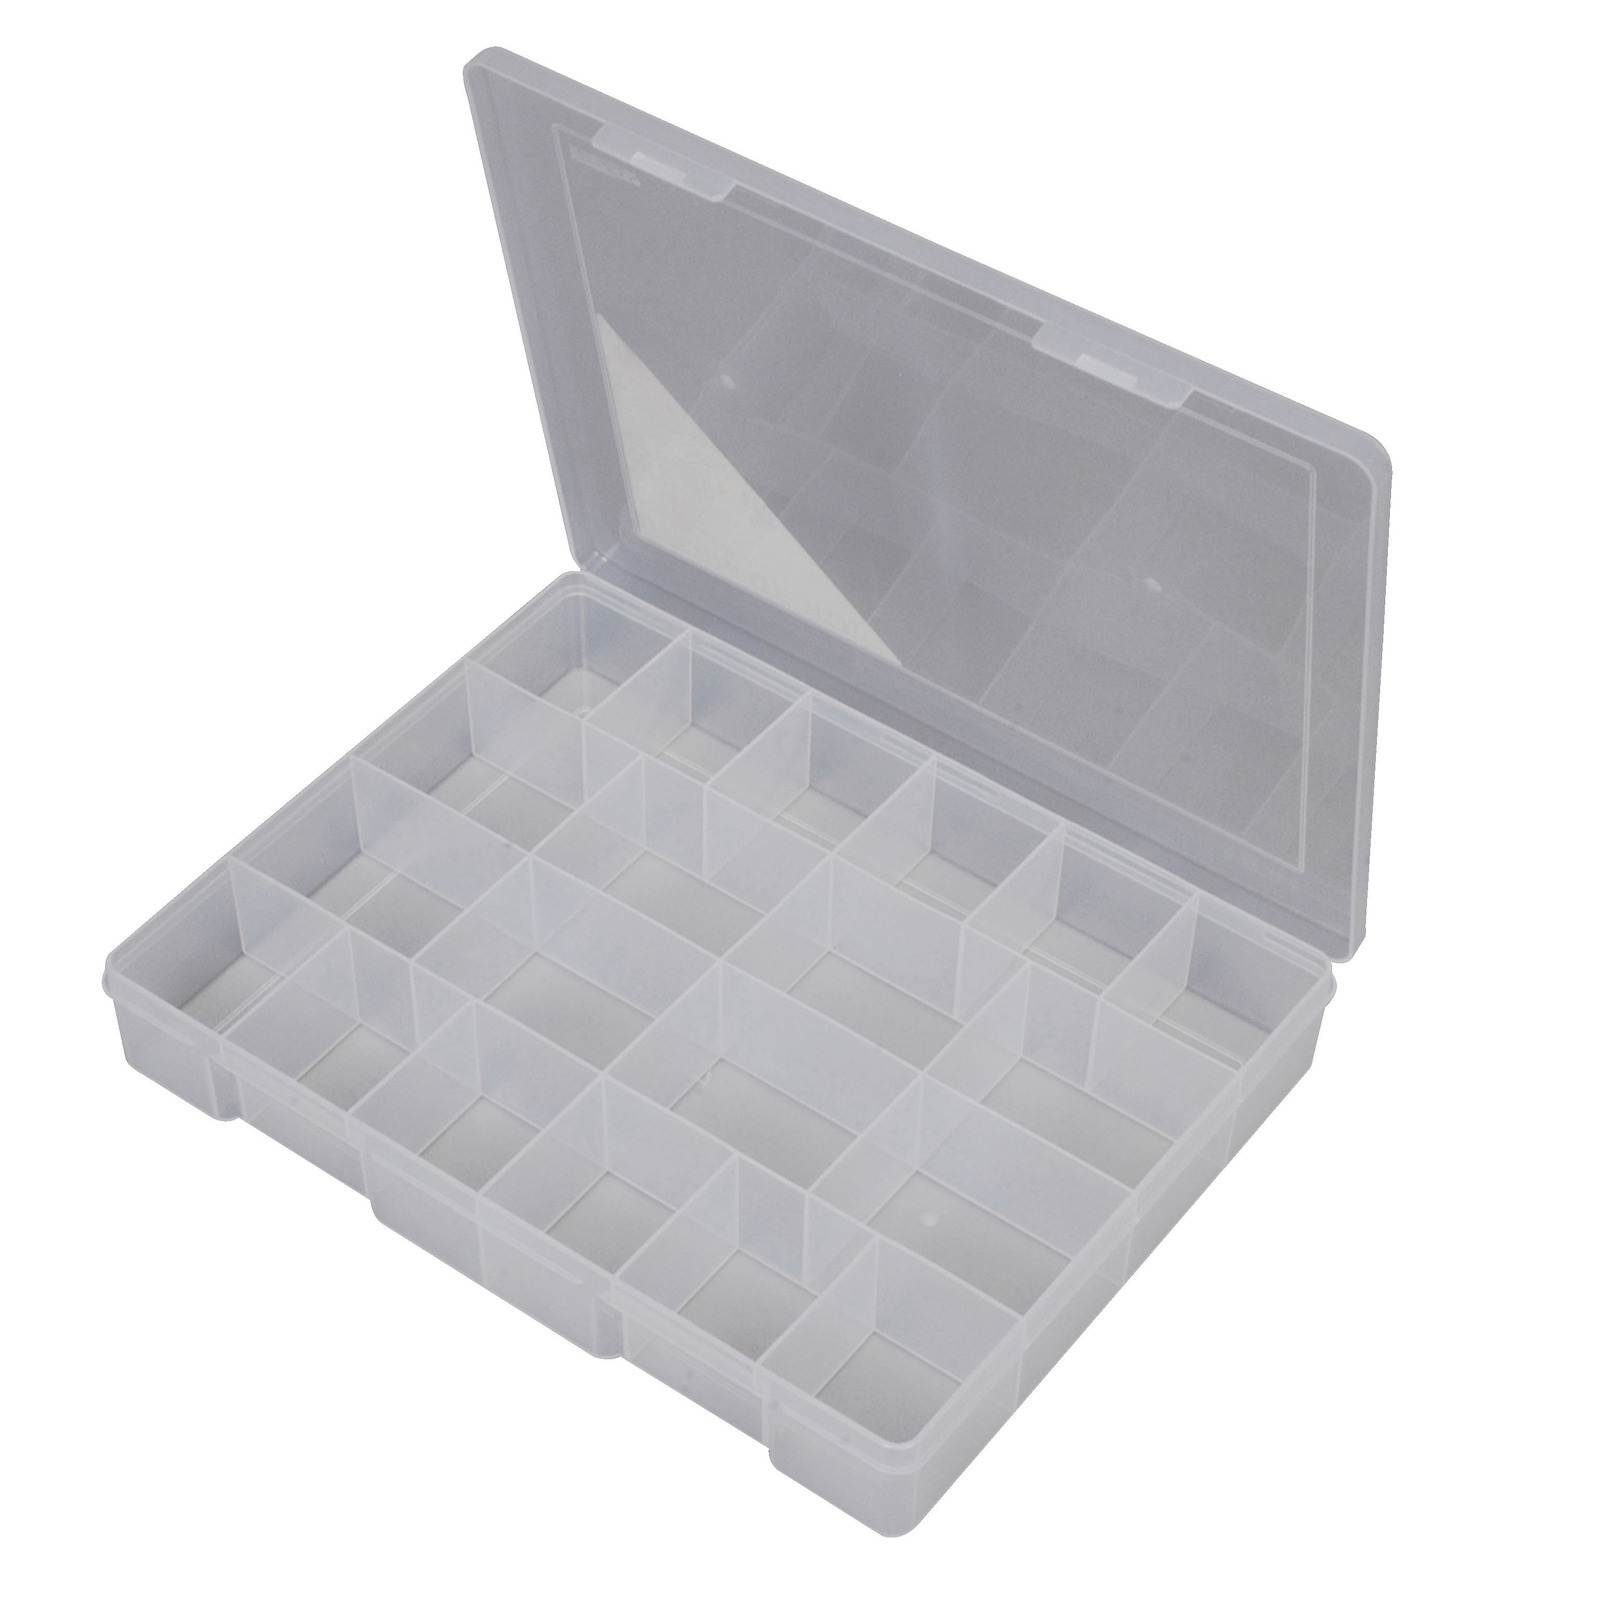 Accessory Boxes - Extra Large (20 compartments)